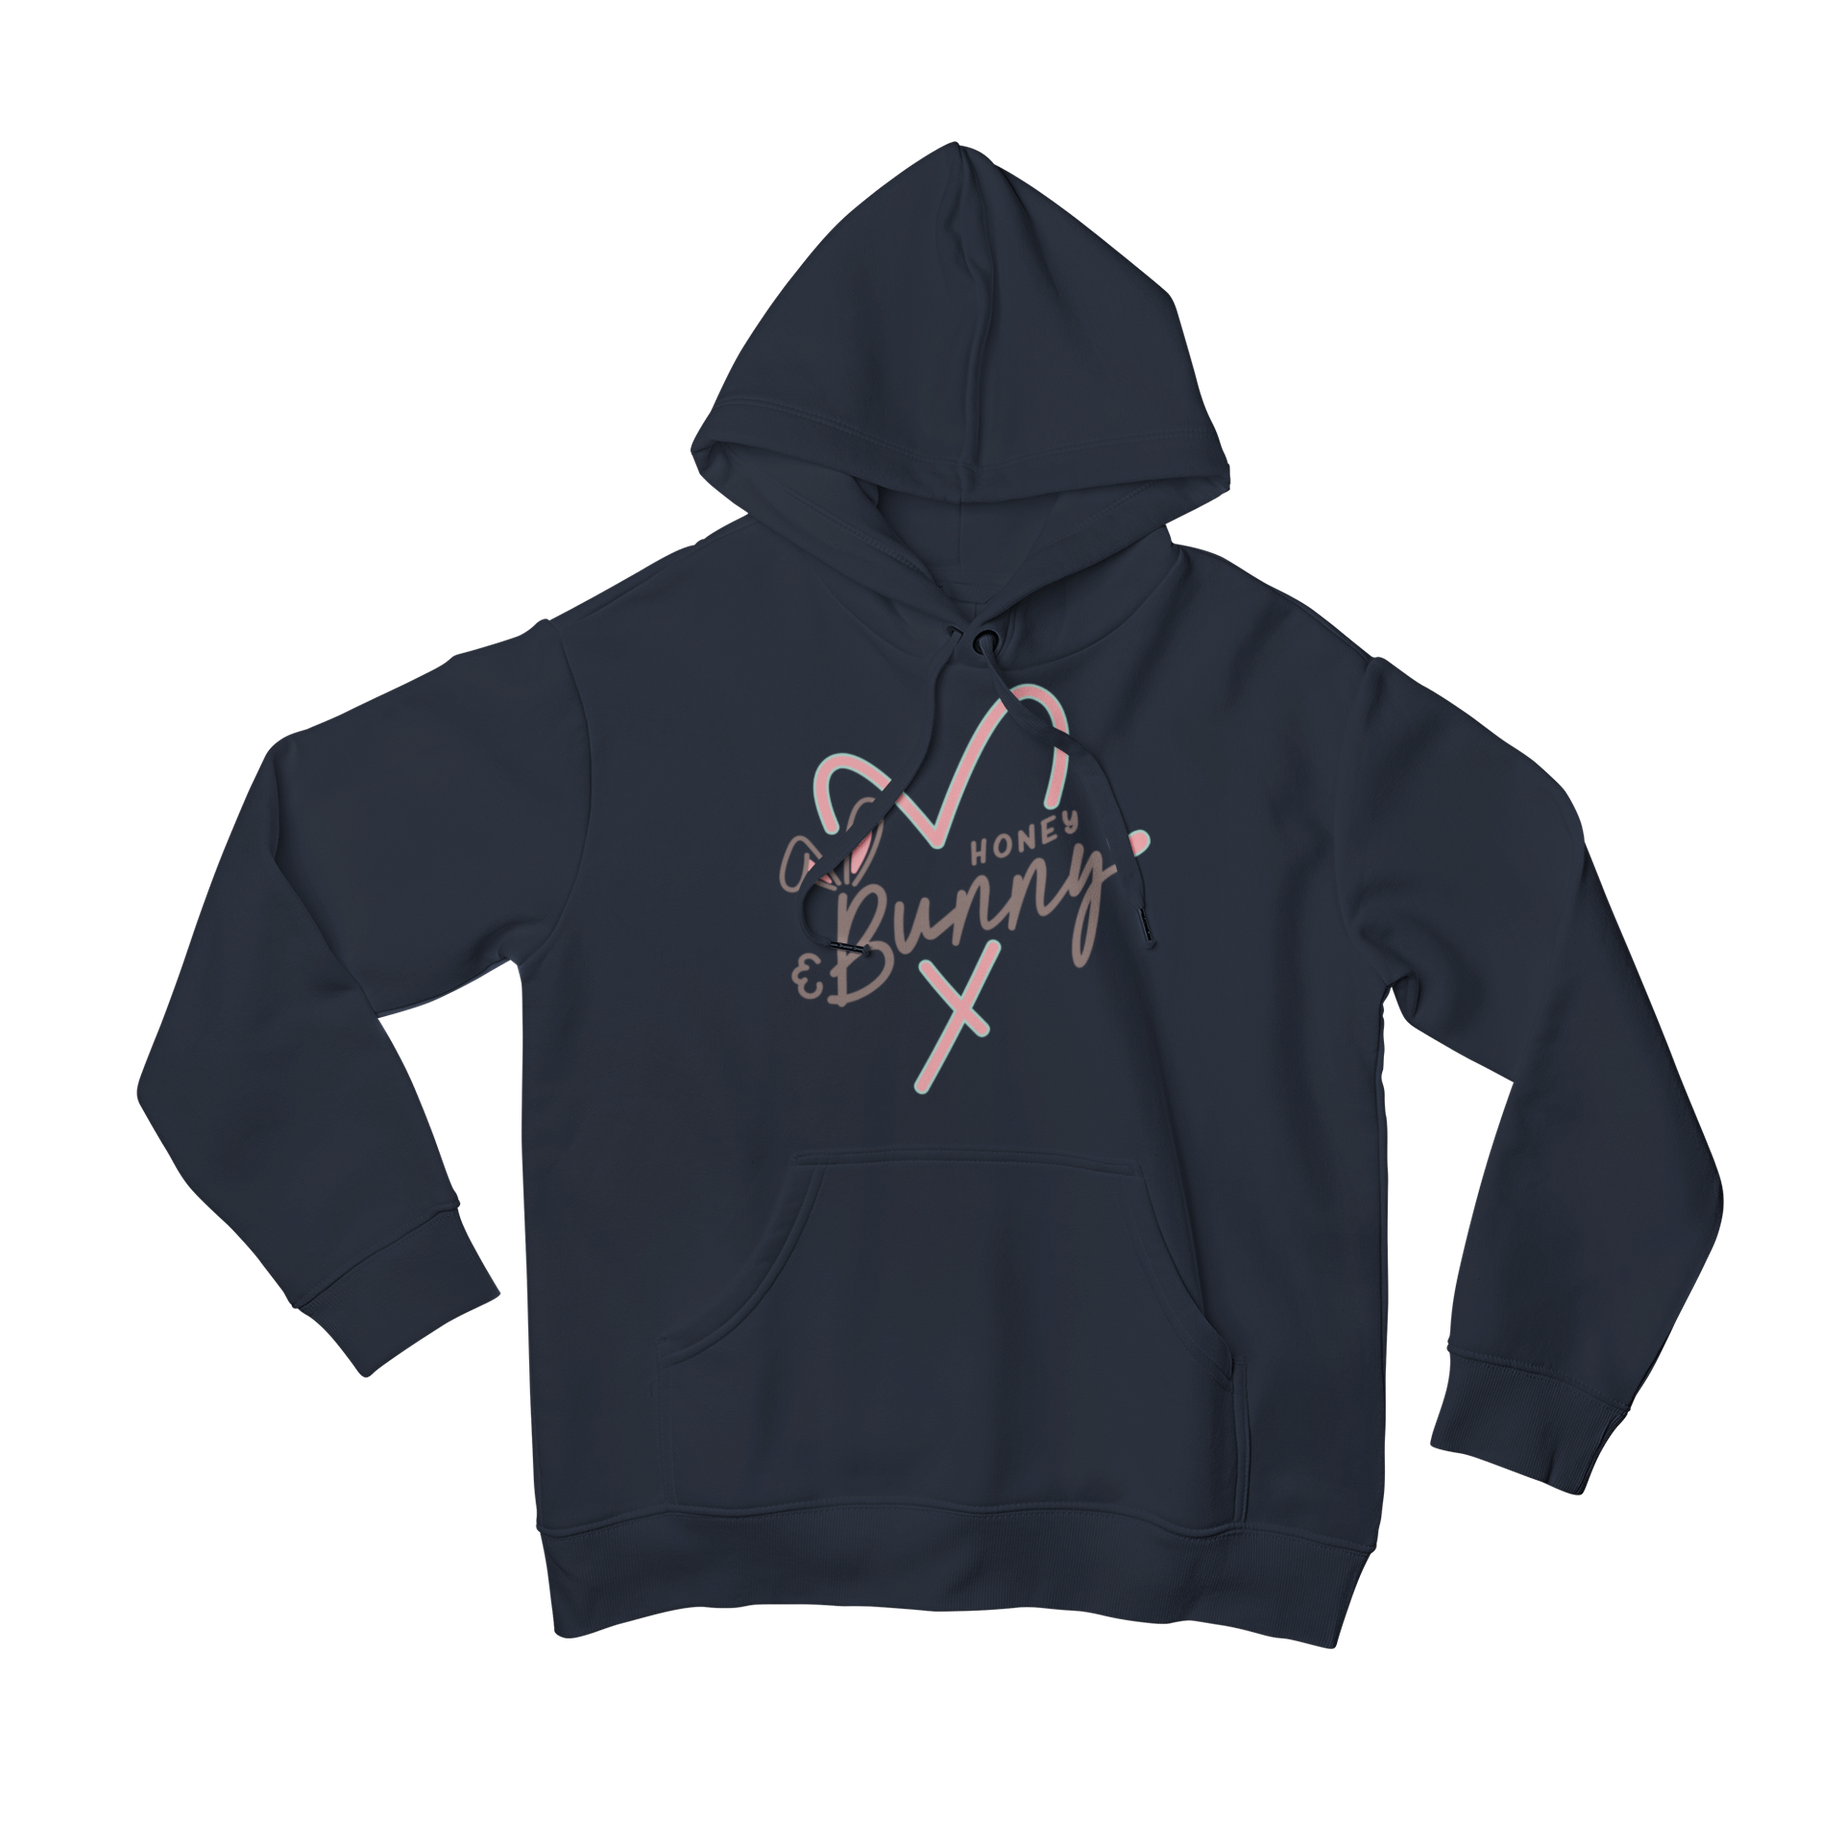 Looking for a stylish and comfortable hoodie to wear this season? Teevolution has got you covered with our front print hoodie featuring a love heart design that says "honey bunny." Stay cozy and look cute with Teevolution's latest fashion.